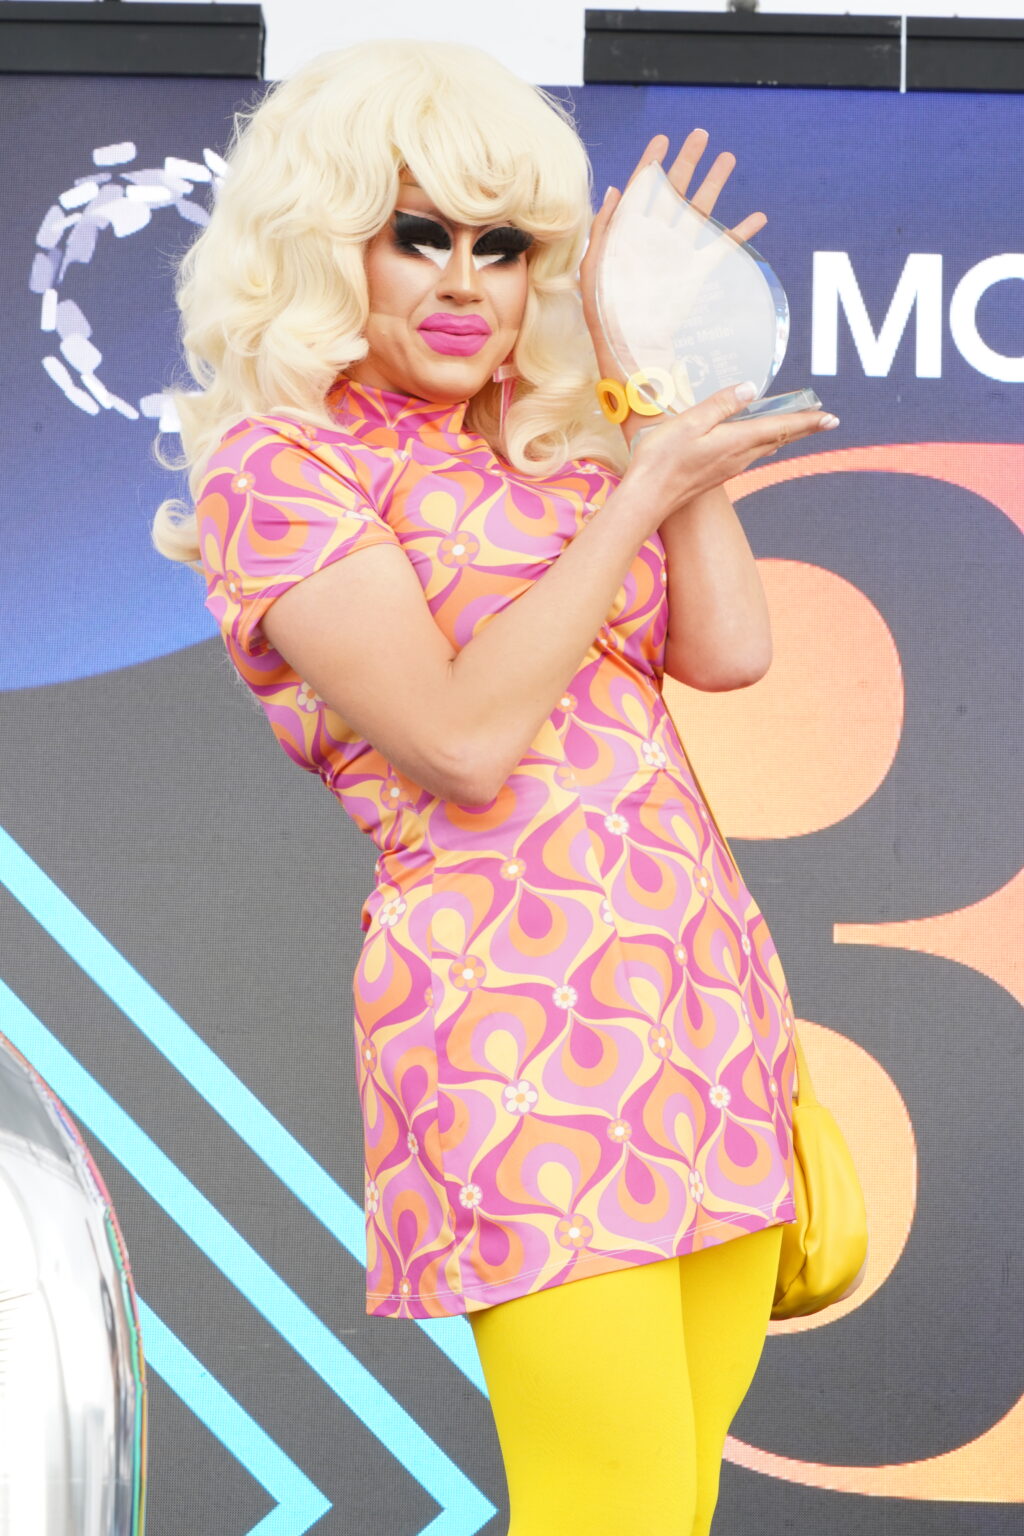 Trixie Mattel Inspires LGBTQ+ Youth to Be Their Best Selves at Models